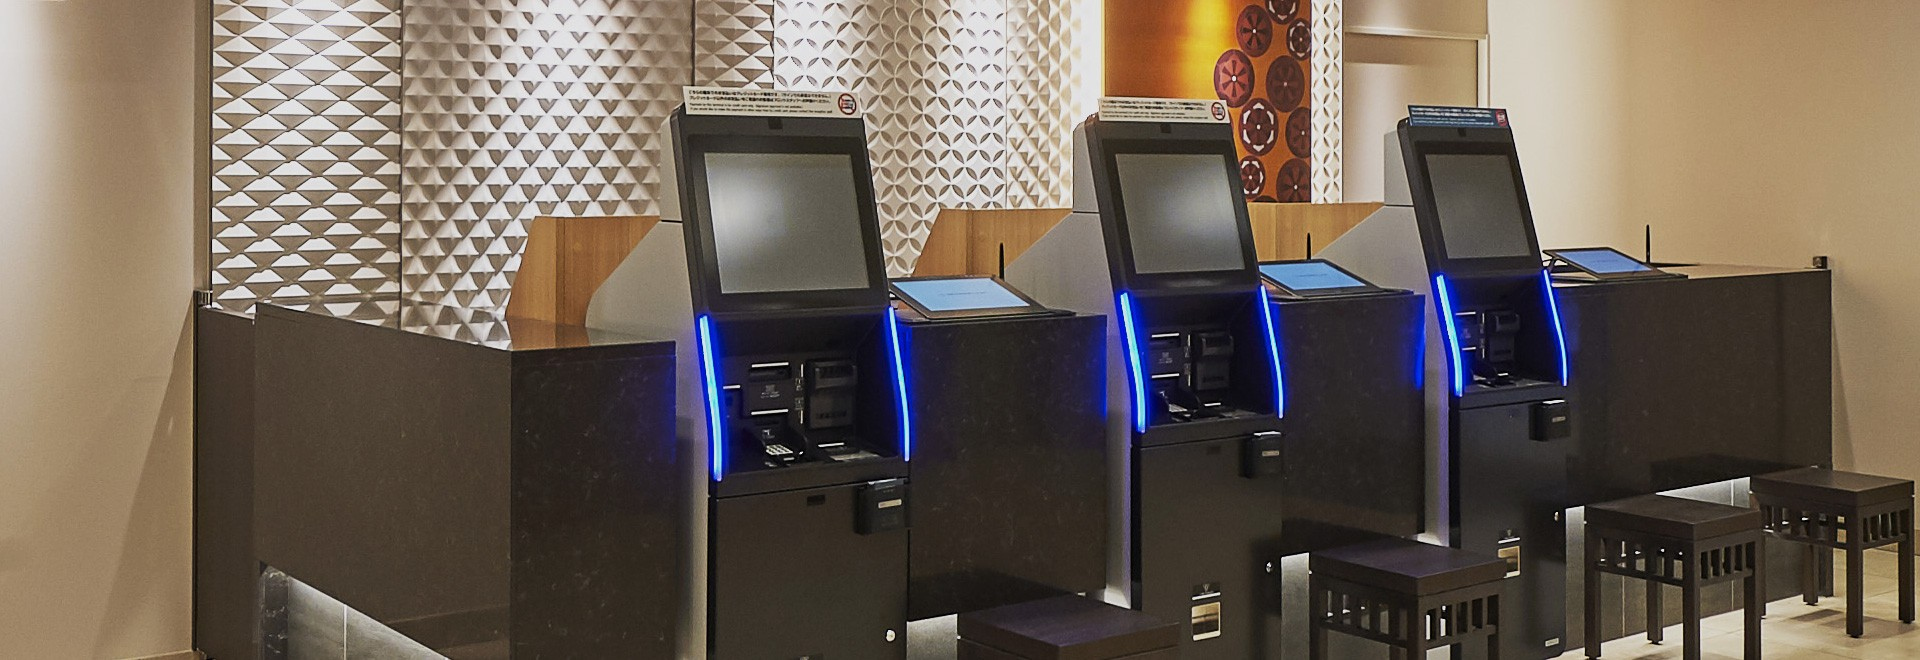 Introduction of check-in and check-out terminals.